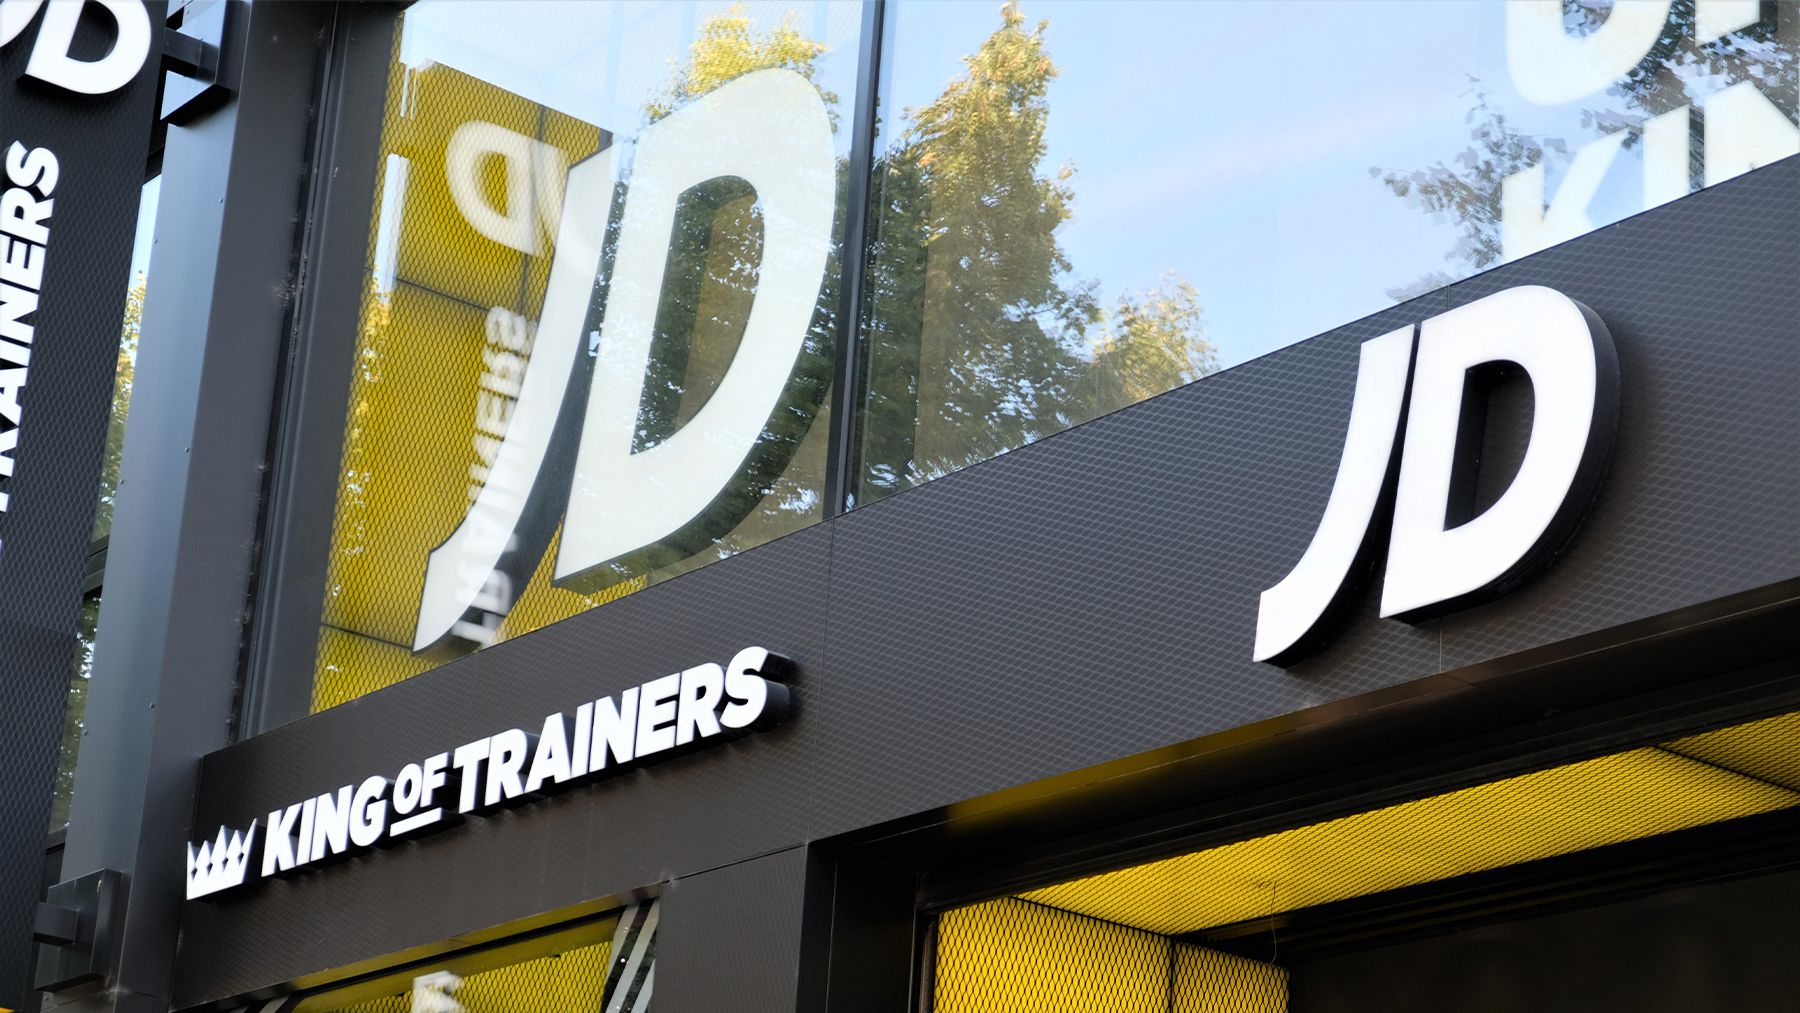 Britain’s JD Sports to Buy France’s Courir in $572 Million Deal